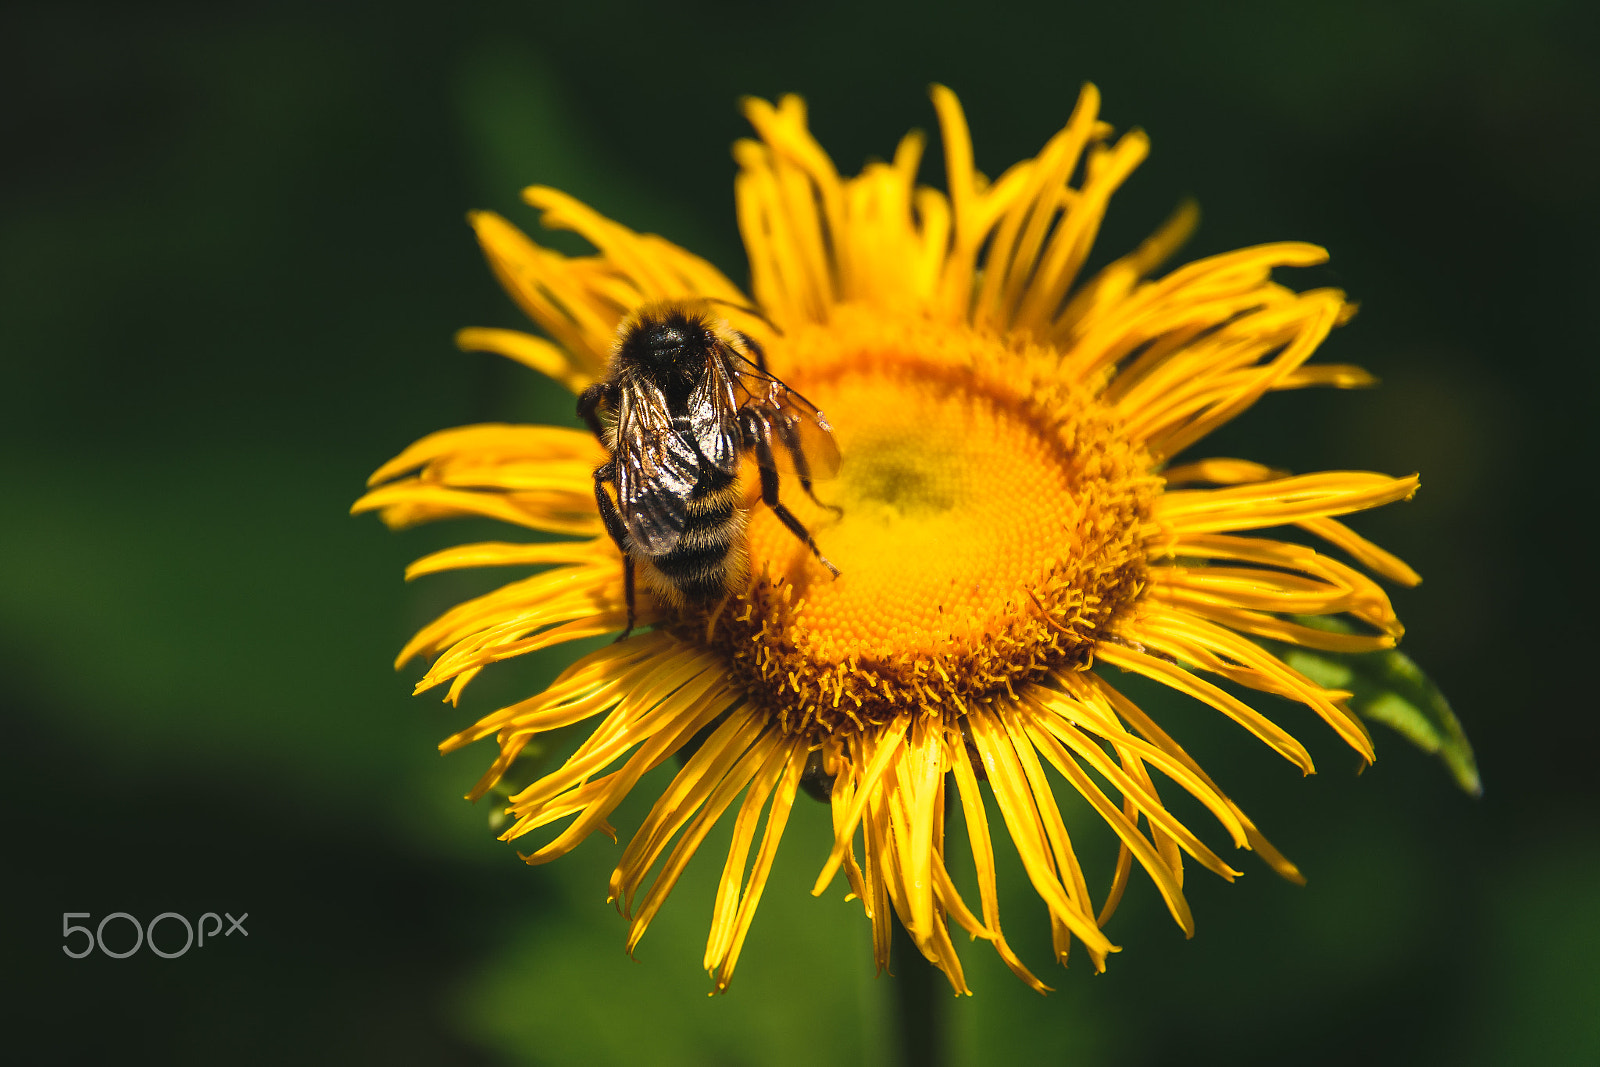 Nikon D5300 + Sigma 17-70mm F2.8-4 DC Macro OS HSM | C sample photo. Flower and bee photography